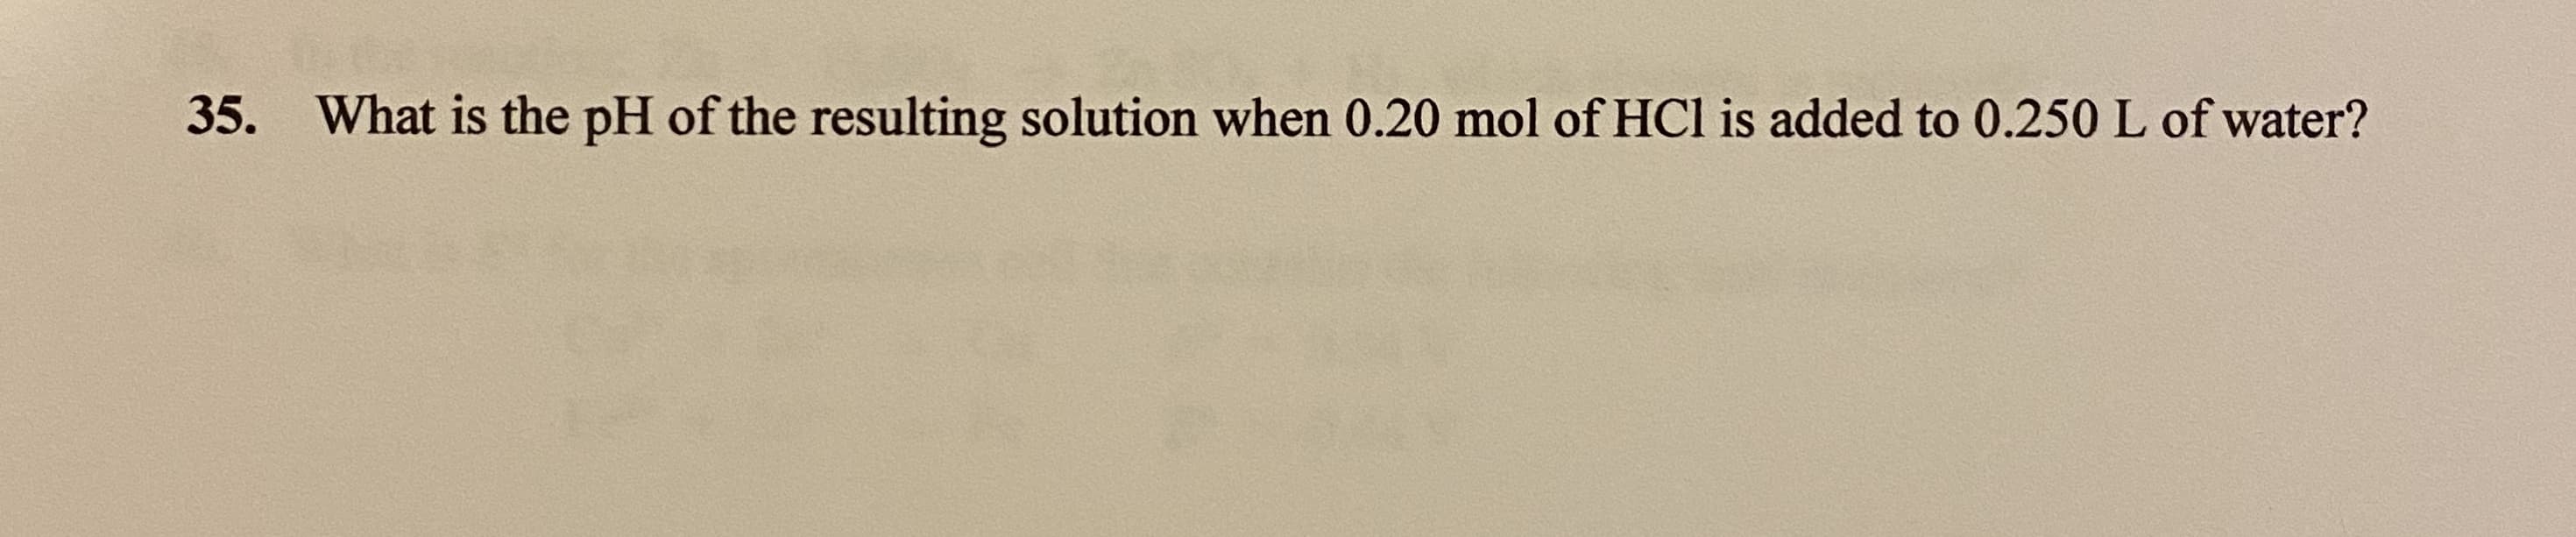 35. What is the pH of the resulting solution when 0.20 mol of HCl is added to 0.250 L of water?
